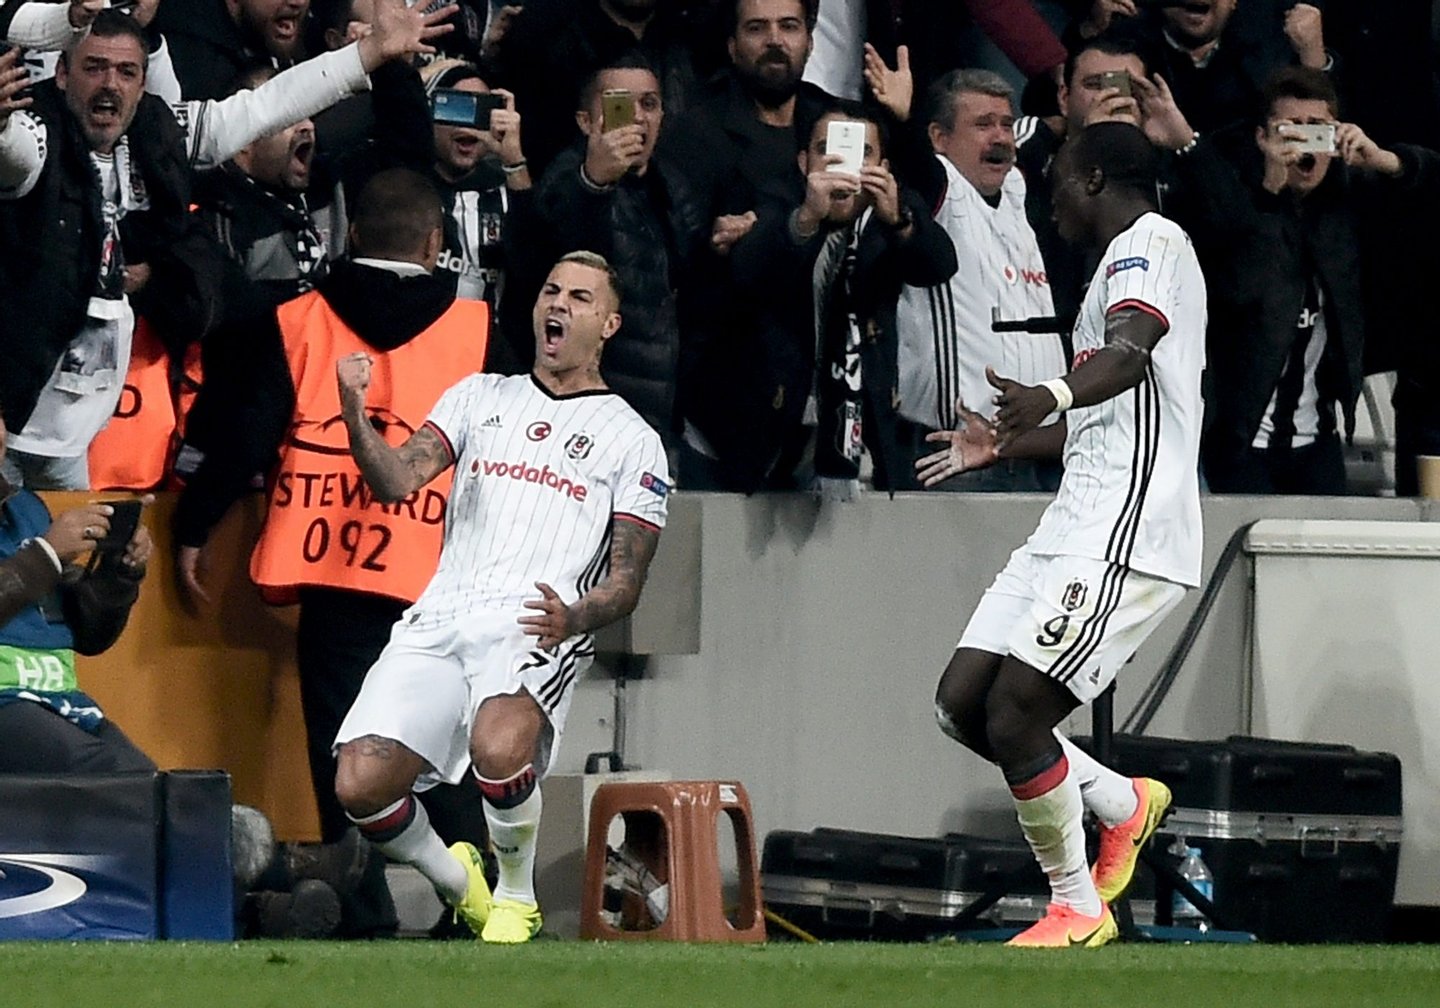 Besiktas' Portuguese midfielder Ricardo Quaresma (L) celebrates with teammate Cameroonian forward Vincent Aboubakar (R) after scoring a goal against Napoli during the UEFA Champions League football match between Besiktas and Napoli at the Vodafone Arena Stadium on November 1, 2016 in Istanbul. / AFP / OZAN KOSE (Photo credit should read OZAN KOSE/AFP/Getty Images)